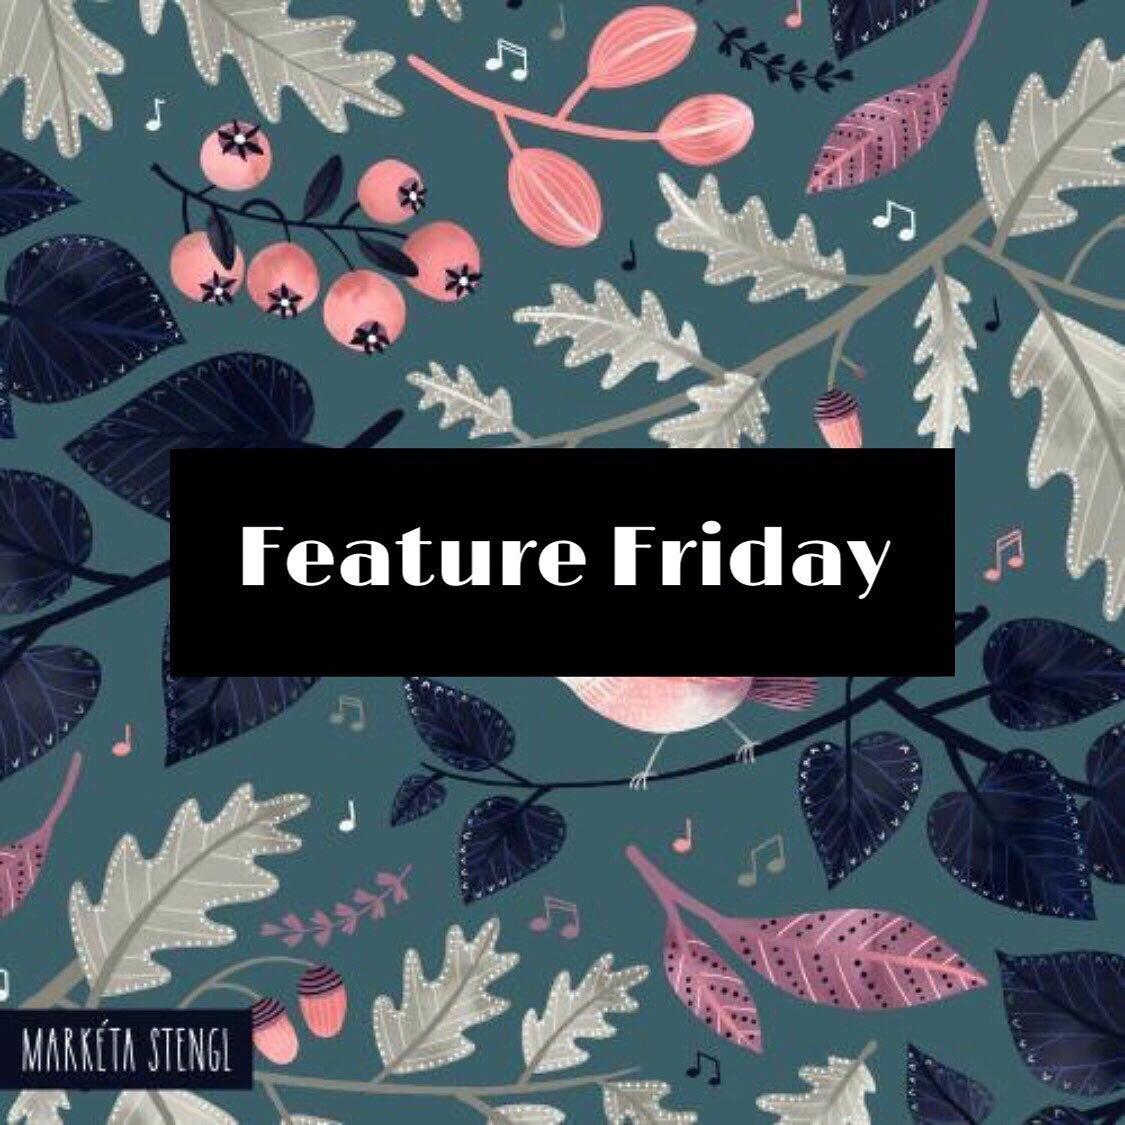 Hello and Happy Friday! I&rsquo;m super excited today&lsquo;s feature and for you to meet Marketa Stengl, a Surface Designer who lives in Zurich, Switzerland. Marketa grew 
up in the Czech Republic and graduated in Fiber Arts from the Academy of Arts